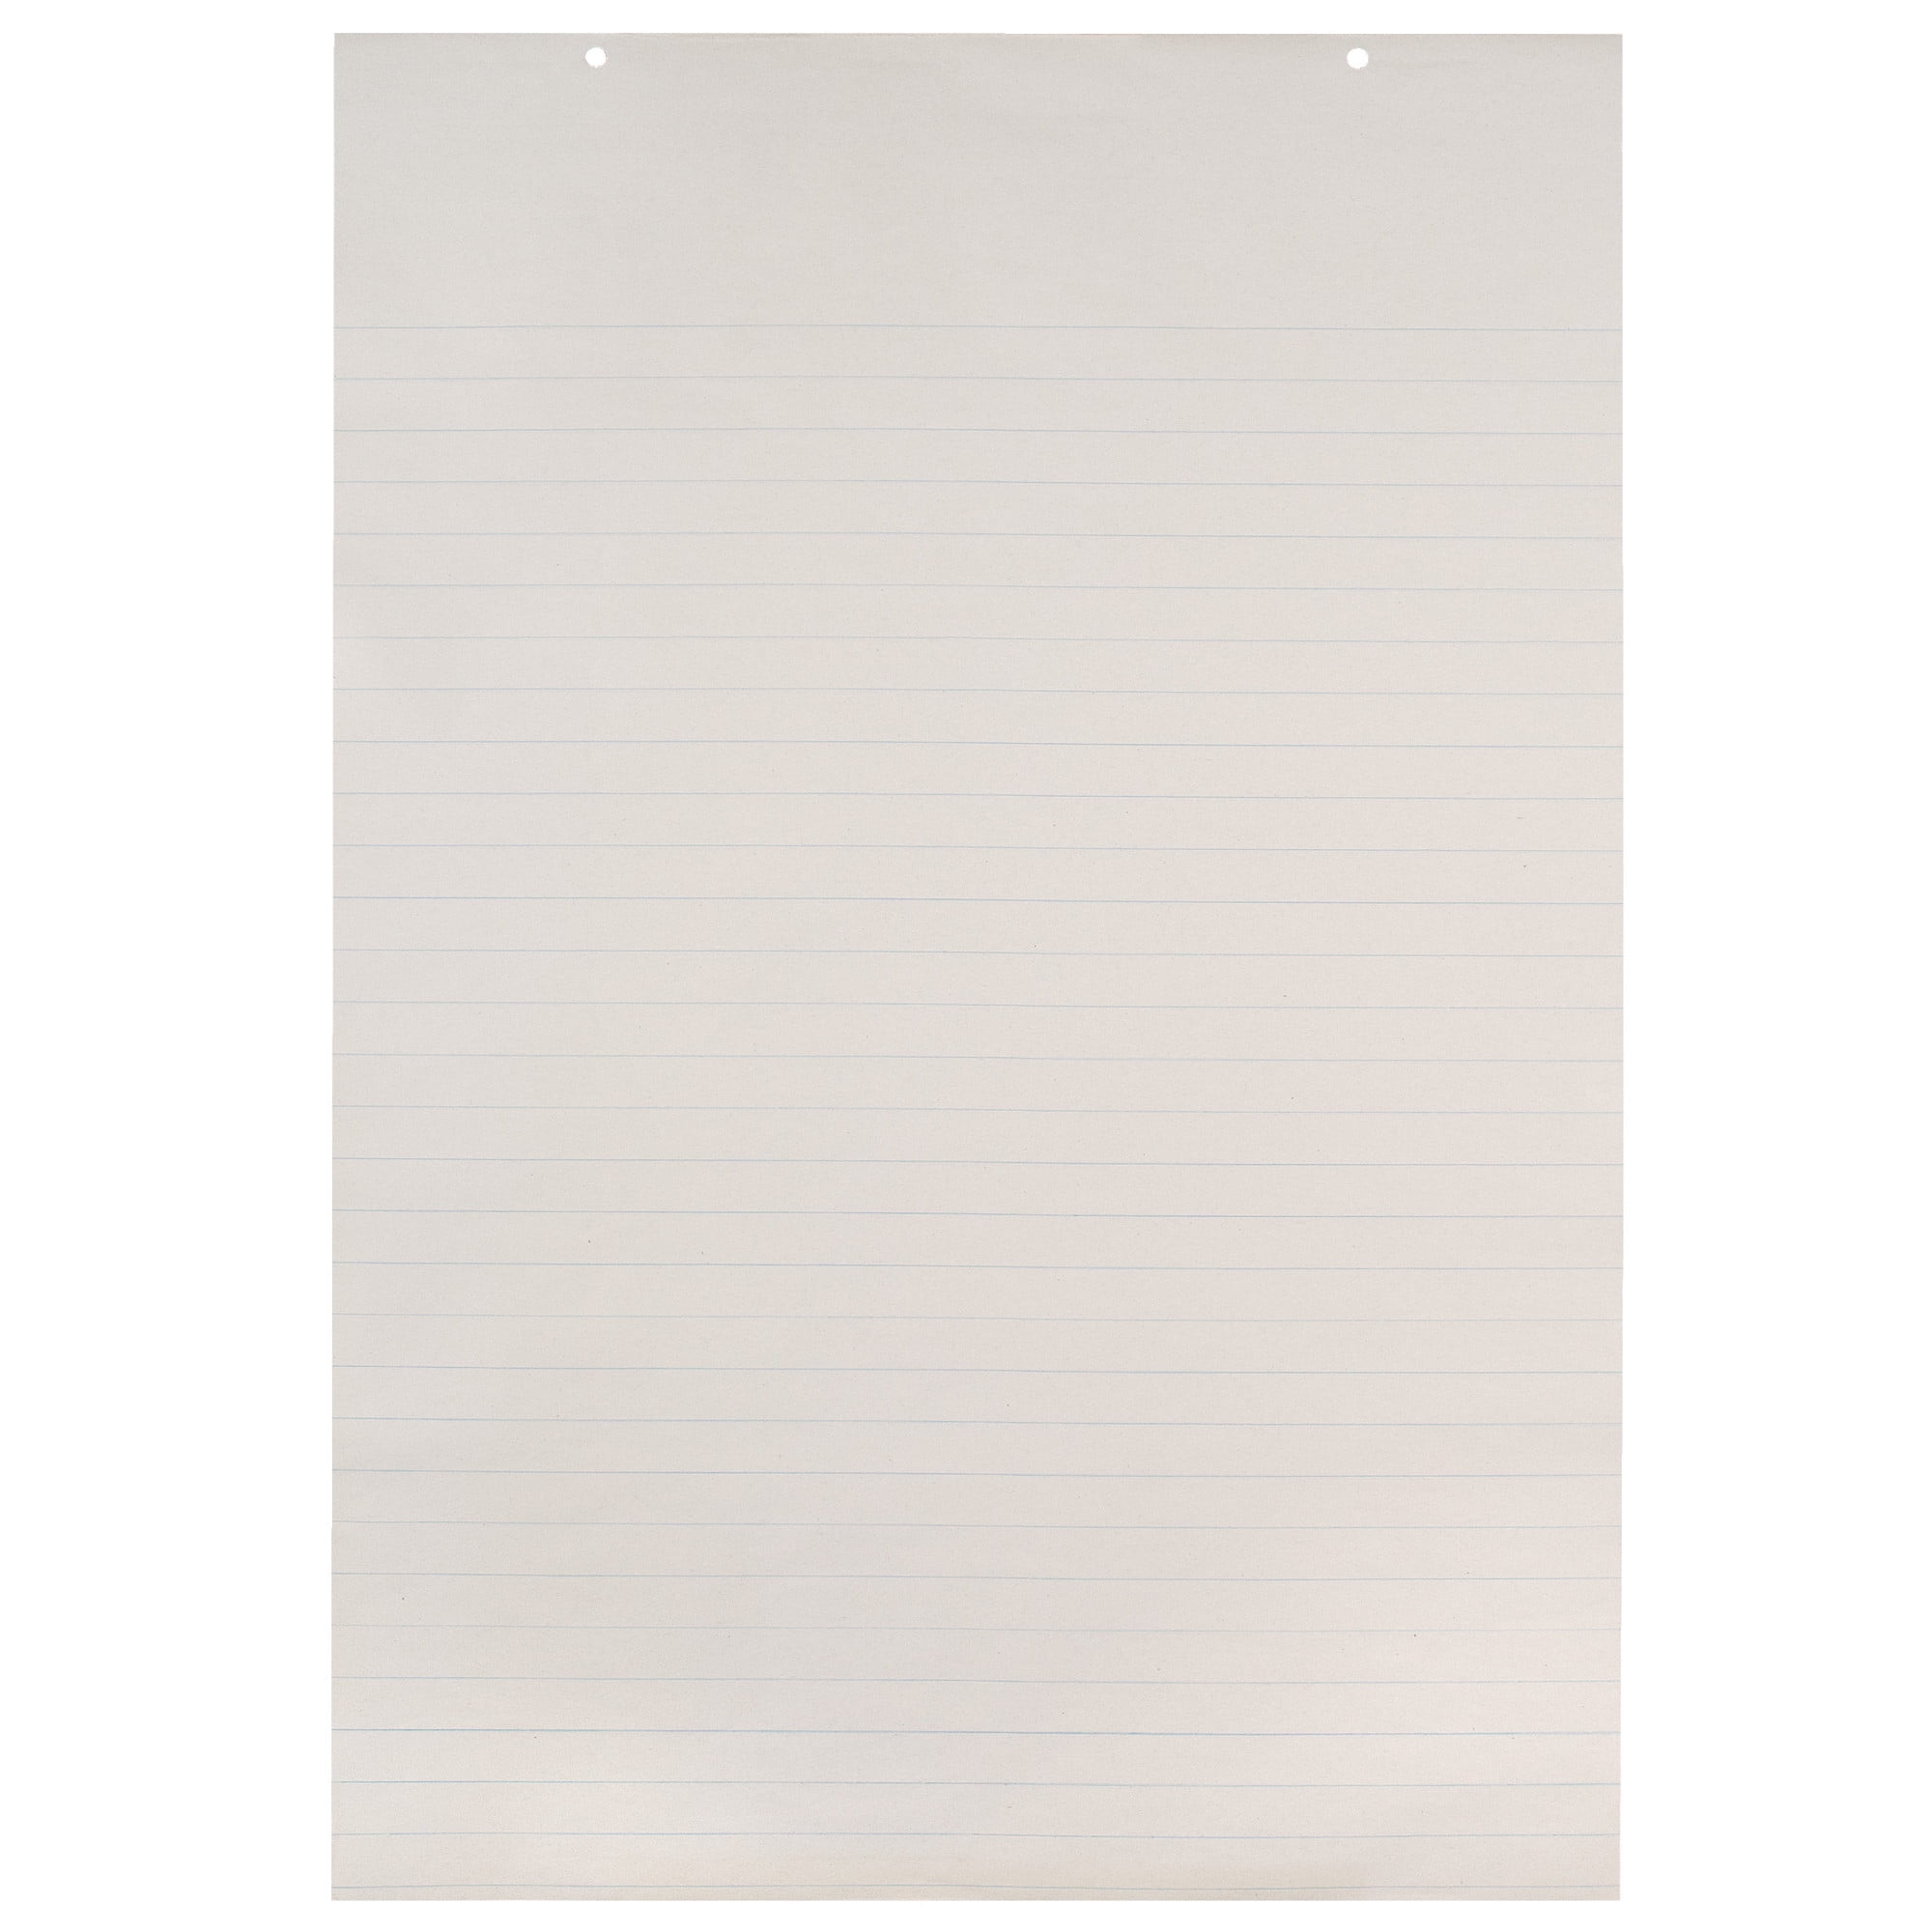 School Smart Newsprint Story Chart Pad, 1 inch Ruling, 24 inch x 36 inch, 100 Sheets, White